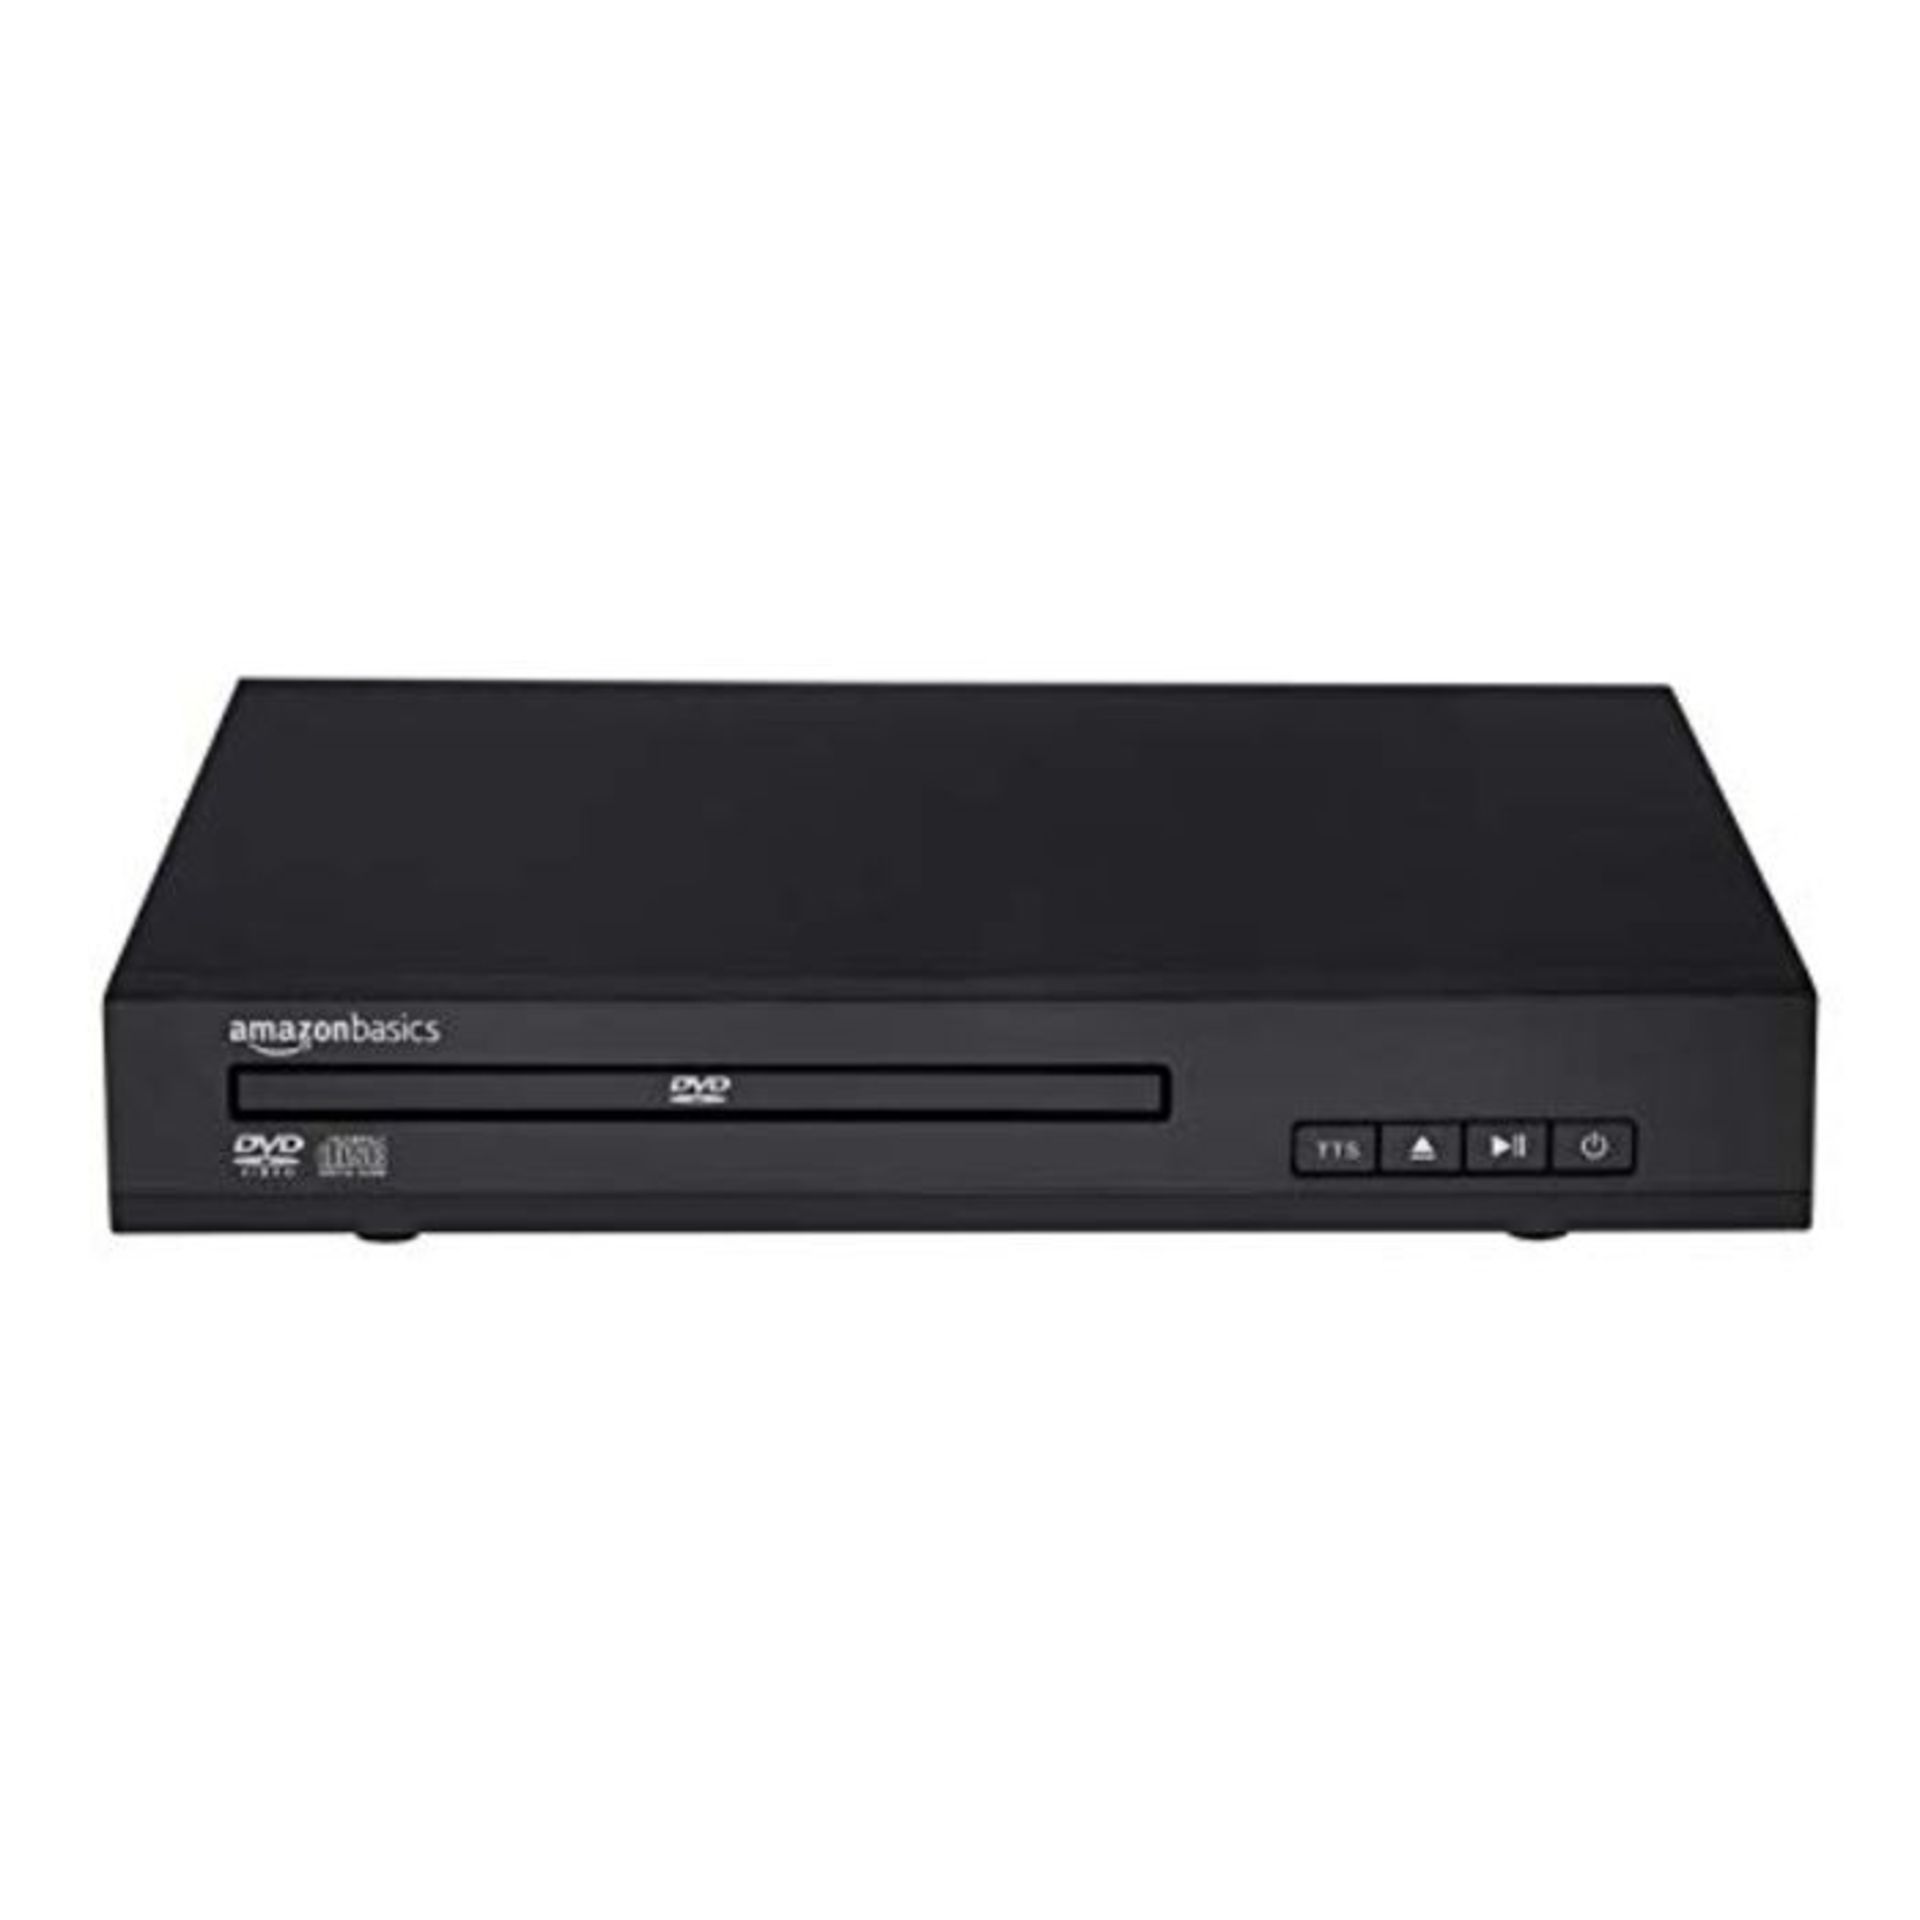 Amazon Basics Mini DVD Player with Text-To-Speech Technology, RCA and Remote Control -